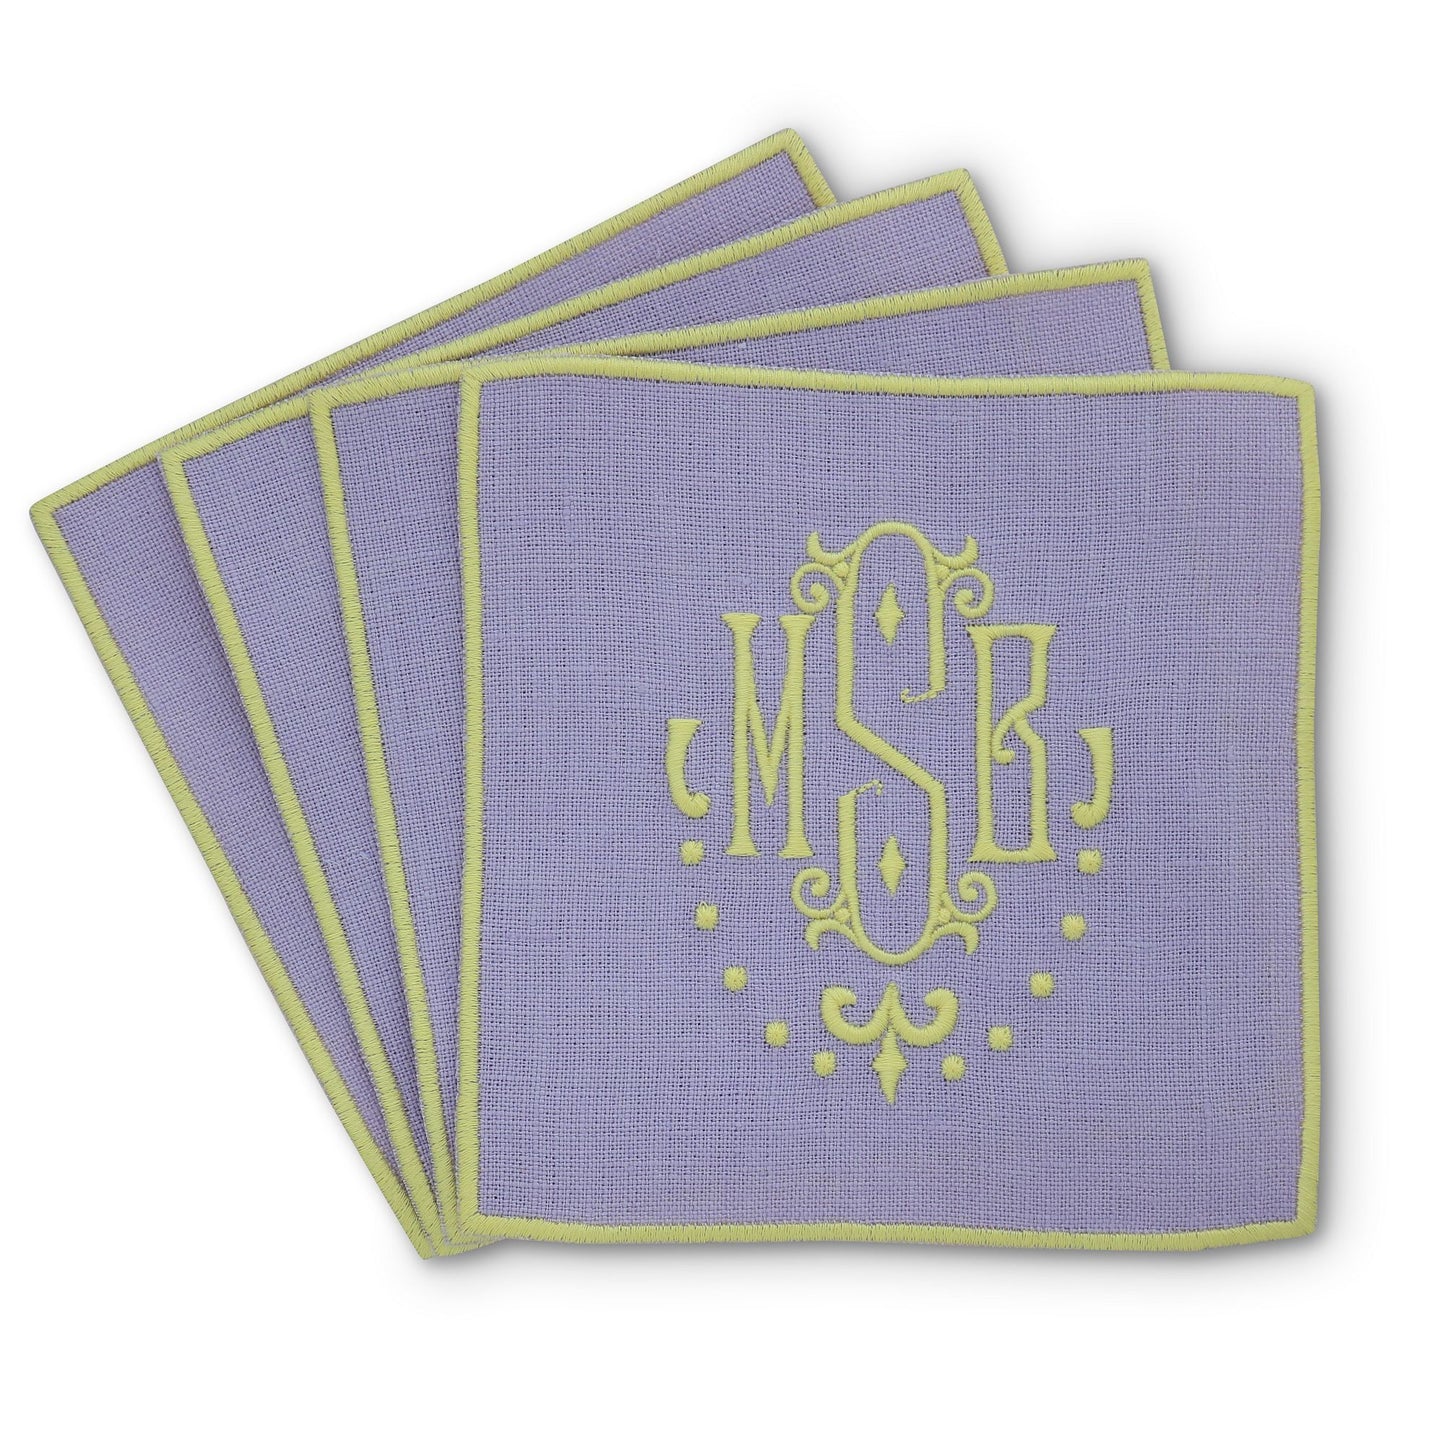 lavender Turin cocktail napkins with monogram Isabelle and initials MSB